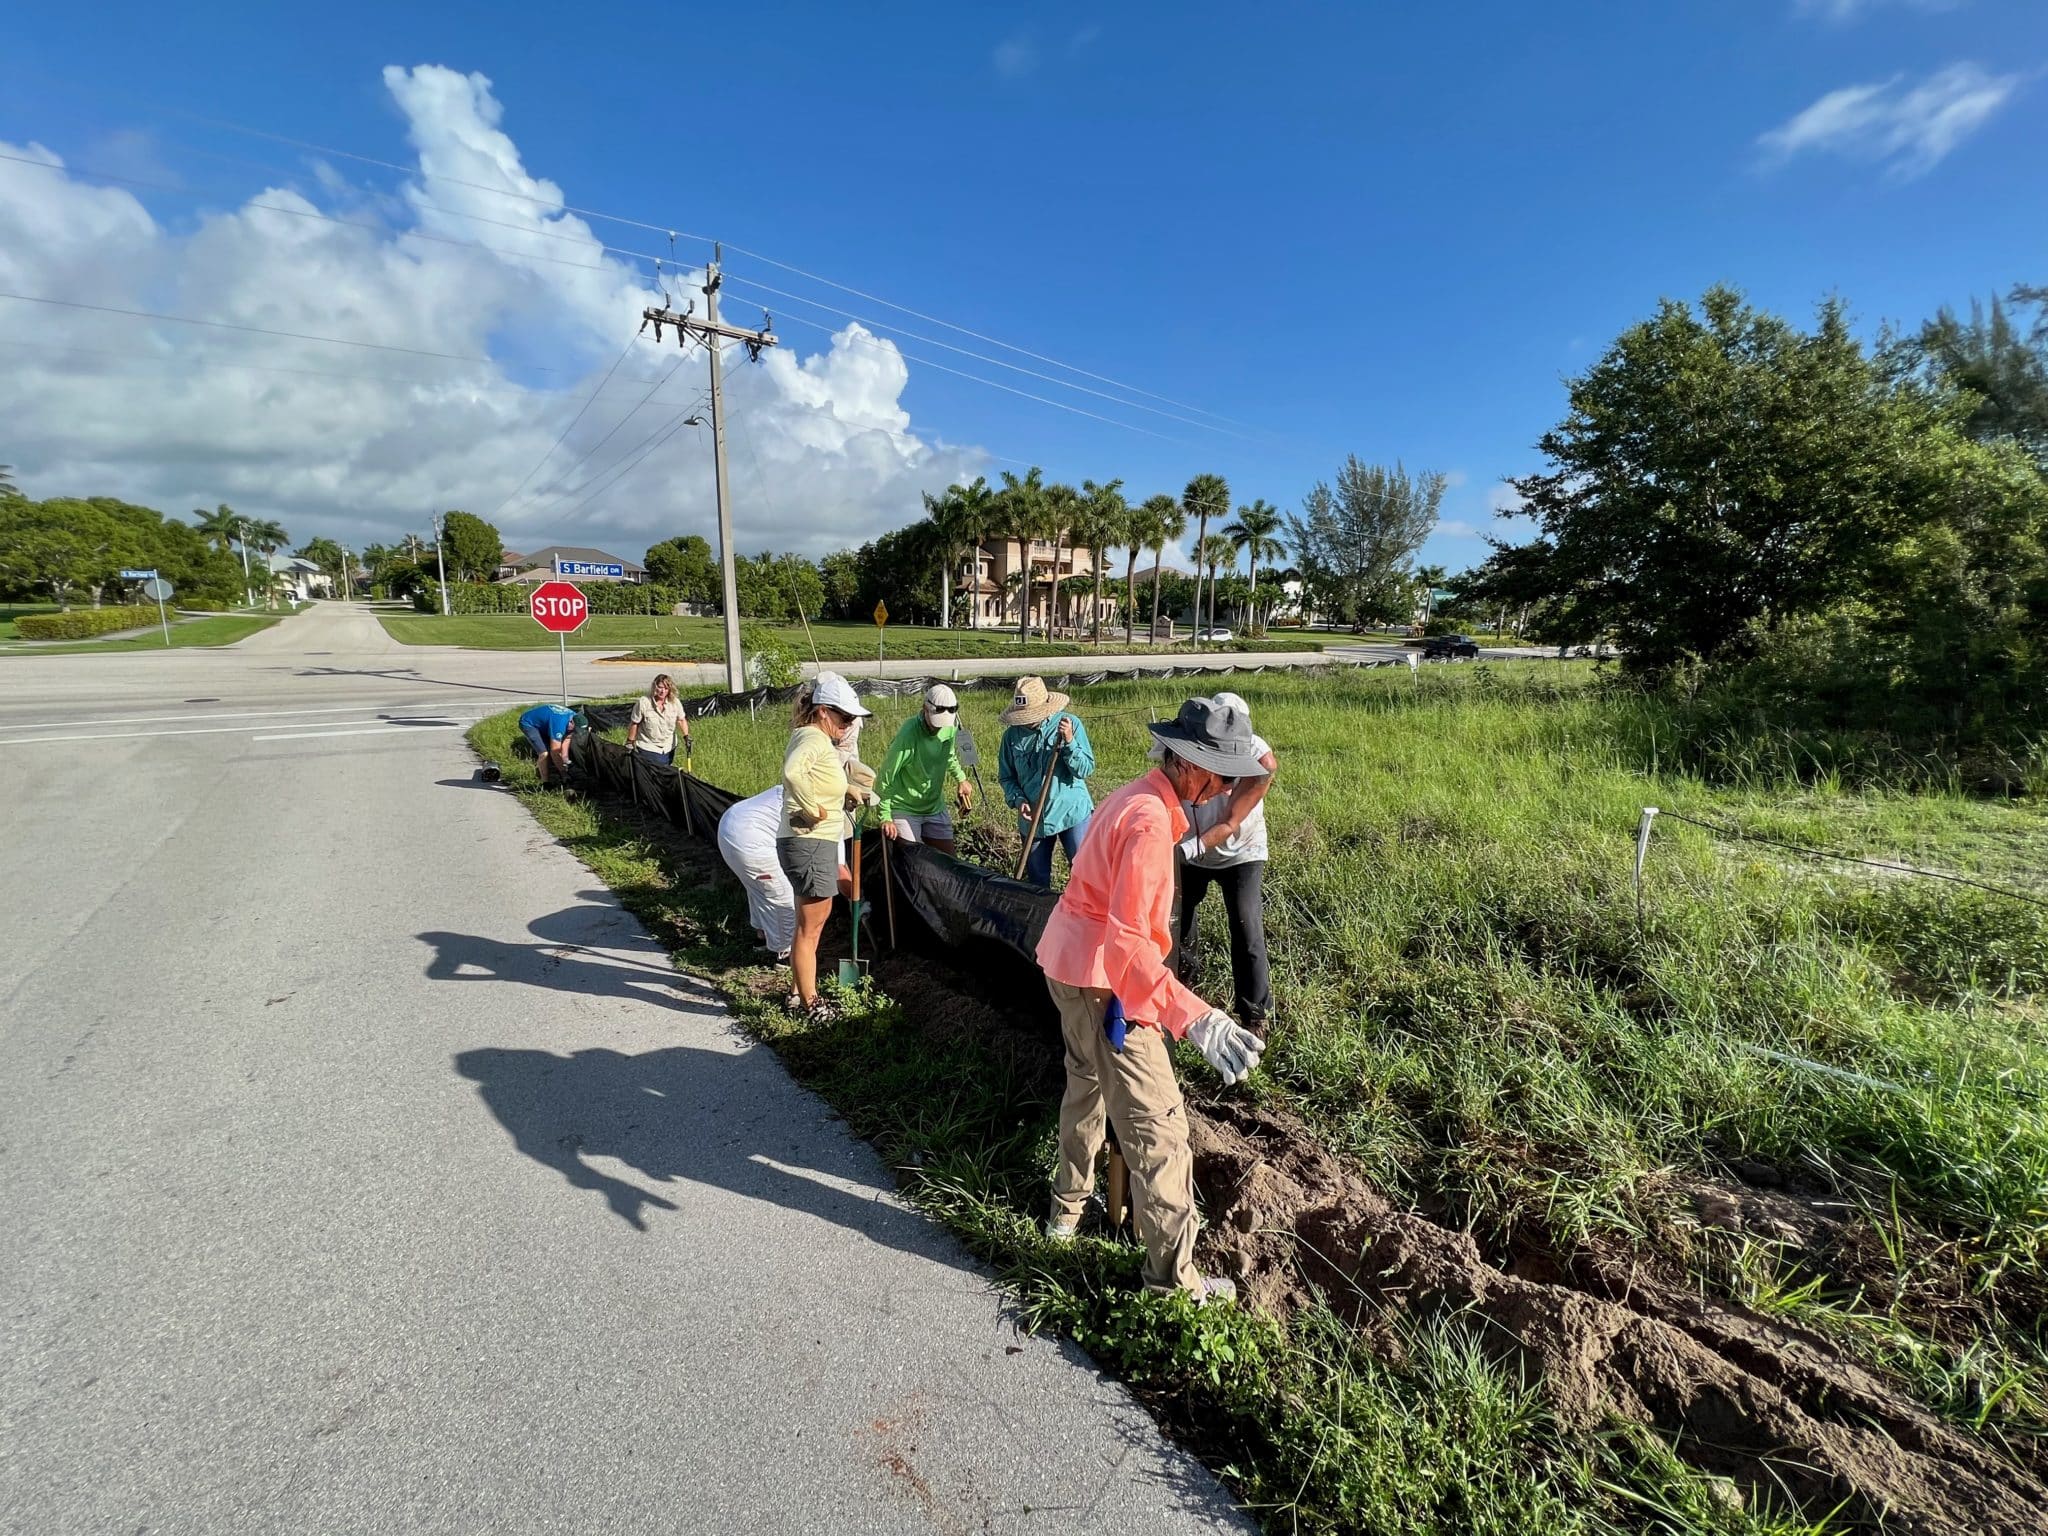 The volunteers work together to unroll and place the protective silt fence along the corner of Hawaii Drive and South Barfield Drive in Marco Island.